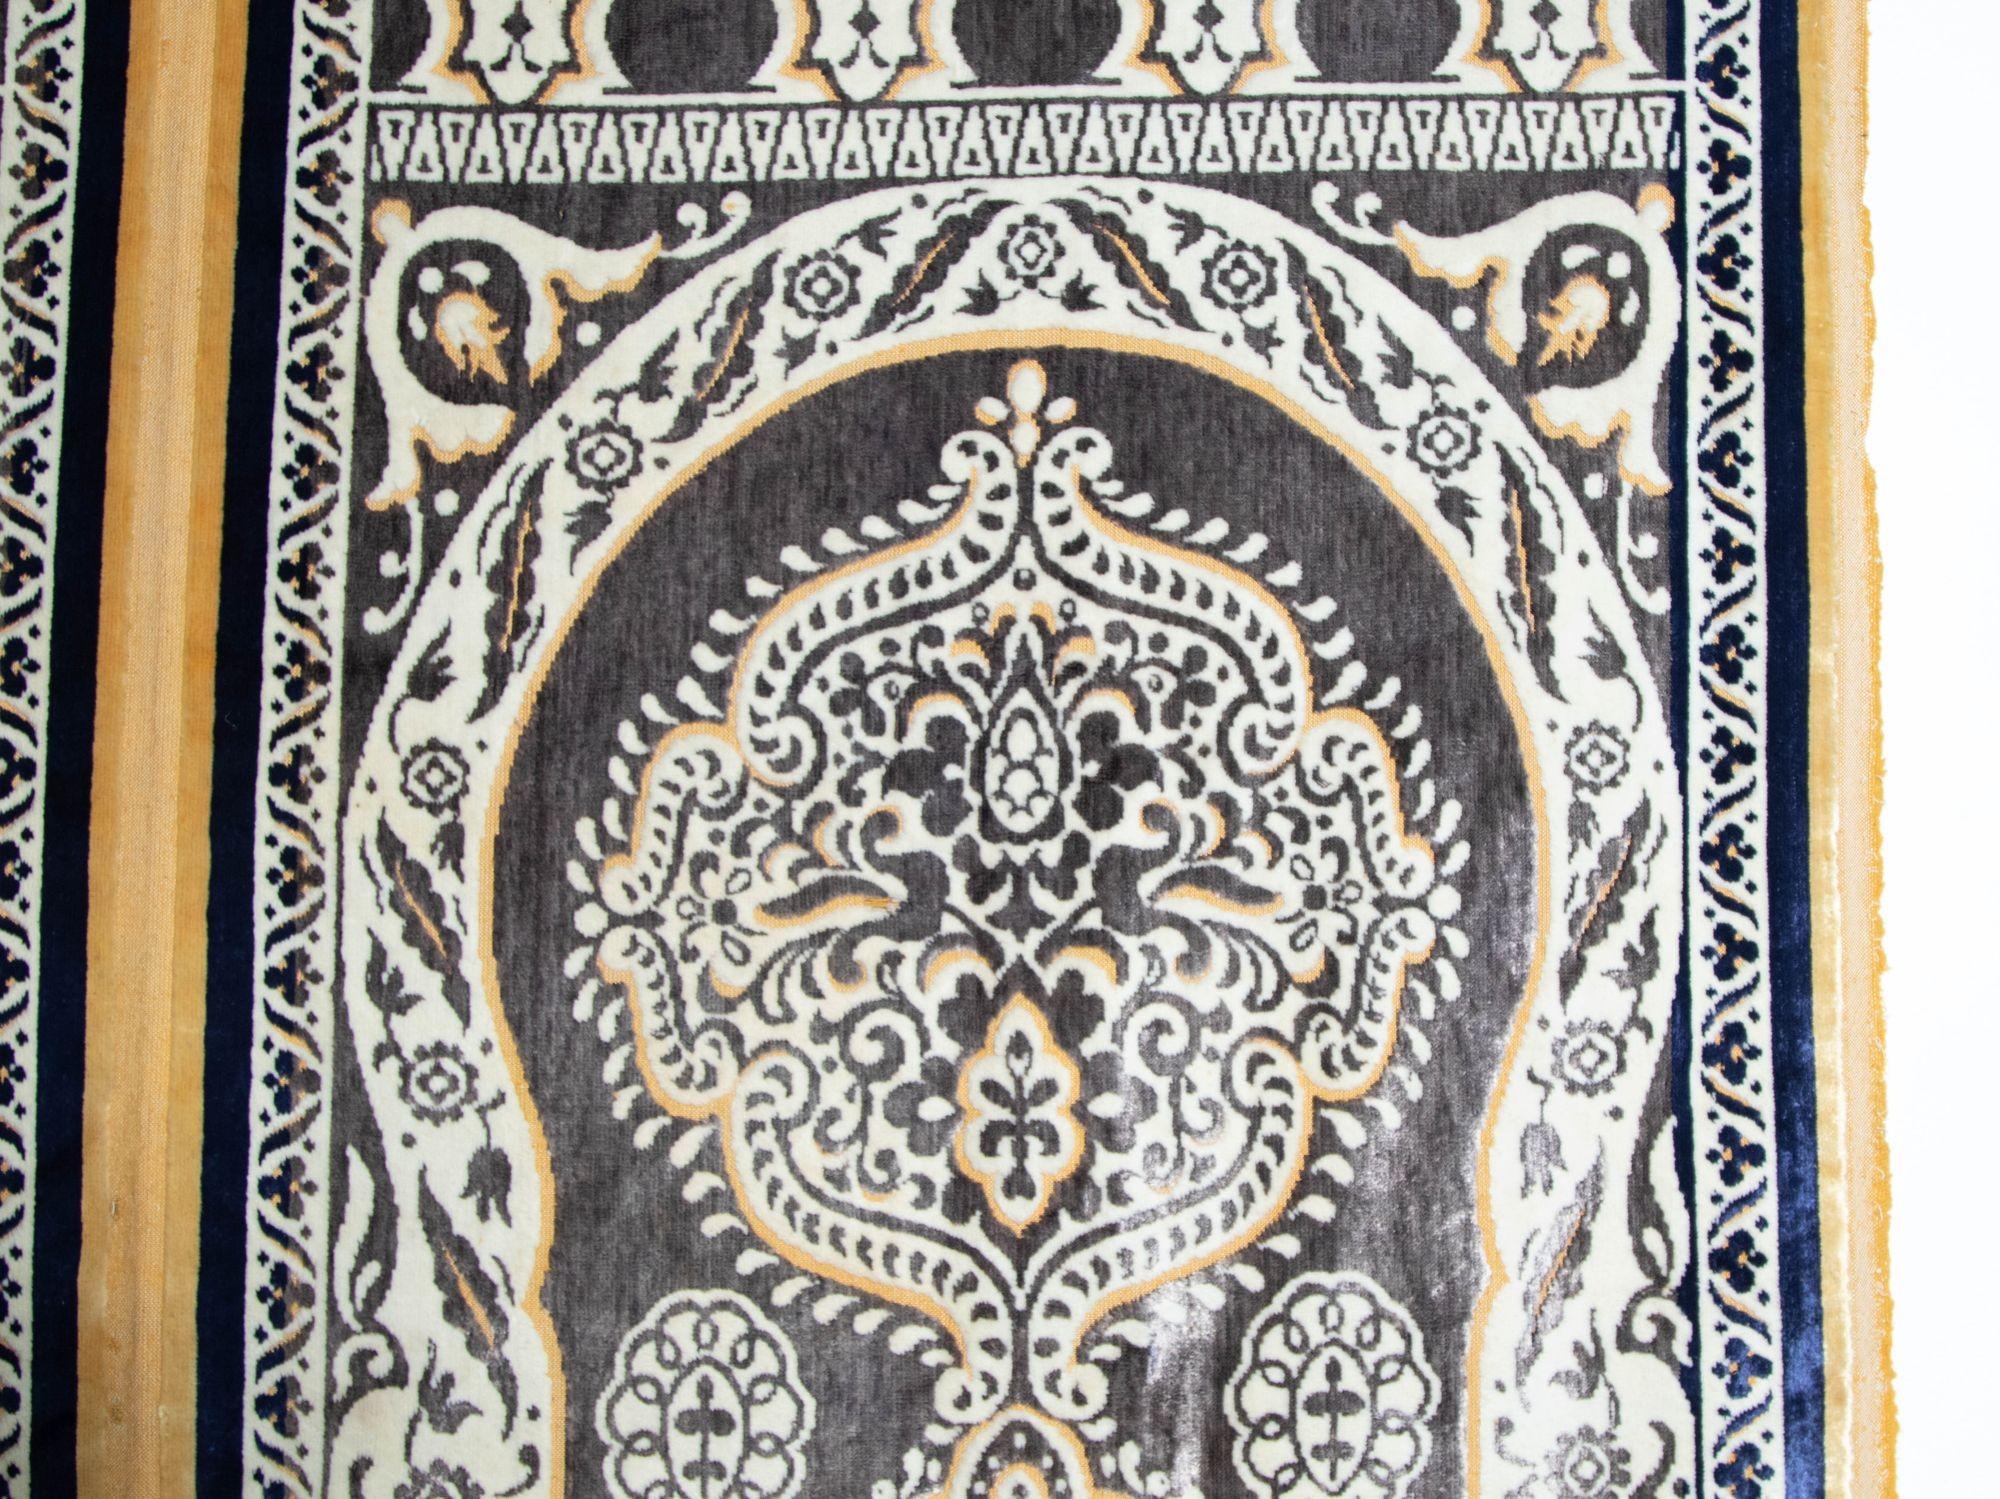 Antique Moroccan Moorish Silk Textile Tapestry Wall Hanging Hiti 19th C. In Good Condition For Sale In North Hollywood, CA